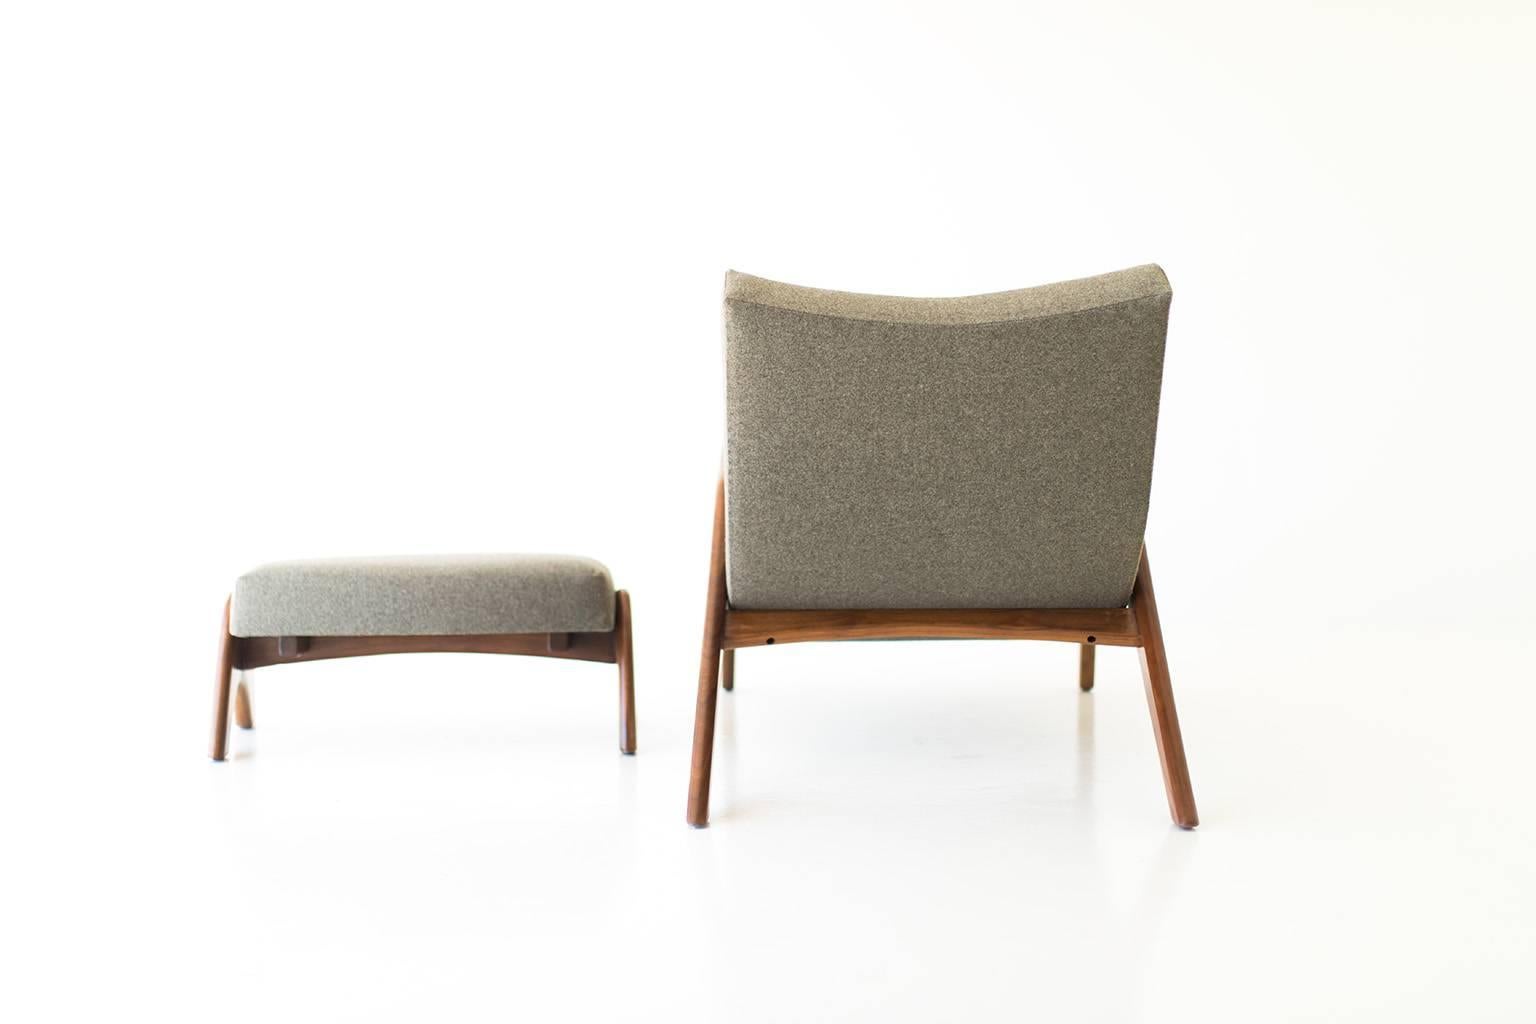 Mid-20th Century Adrian Pearsall Lounge Chair and Ottoman for Craft Associates Inc.